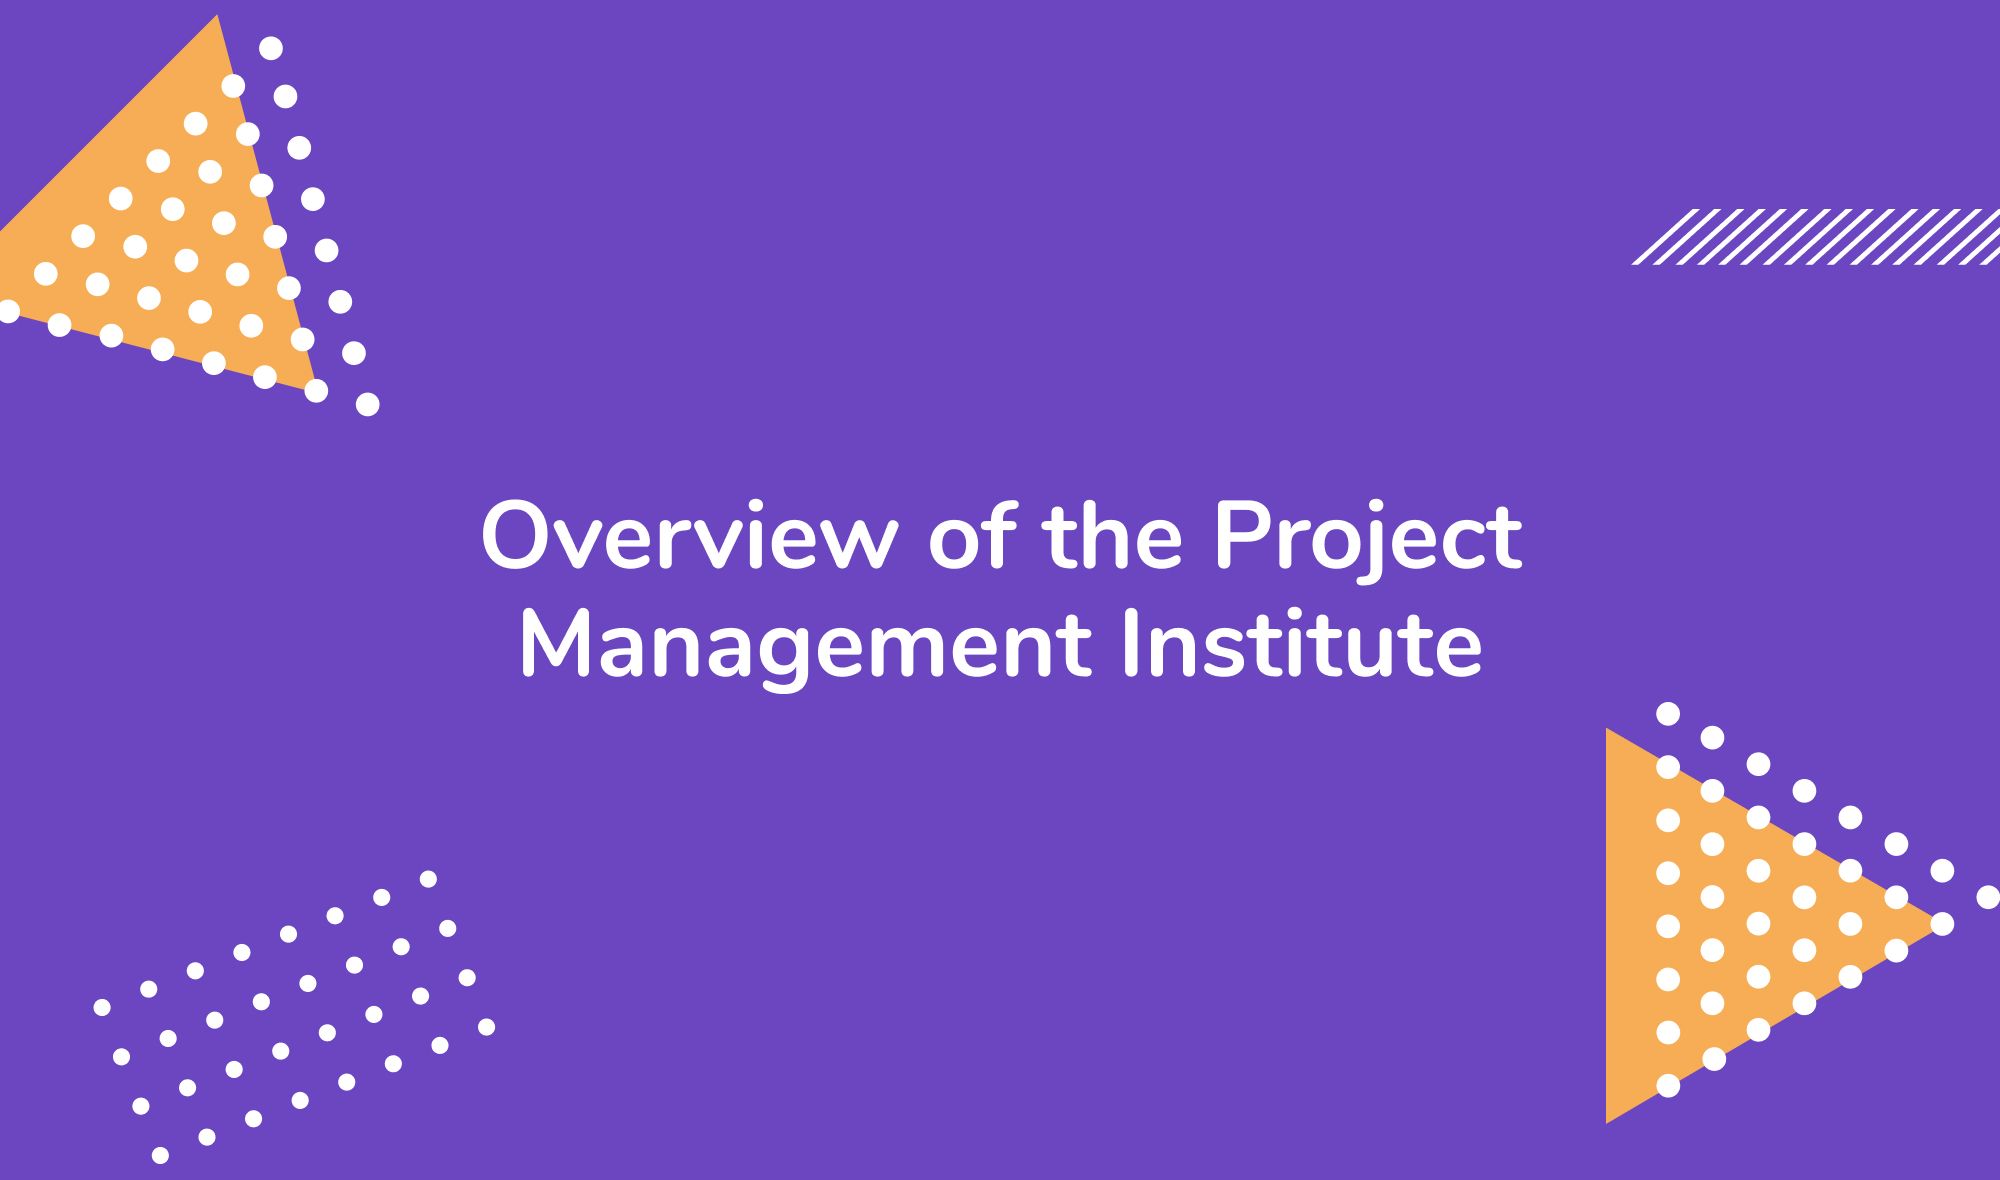 Overview of the Project Management Institute